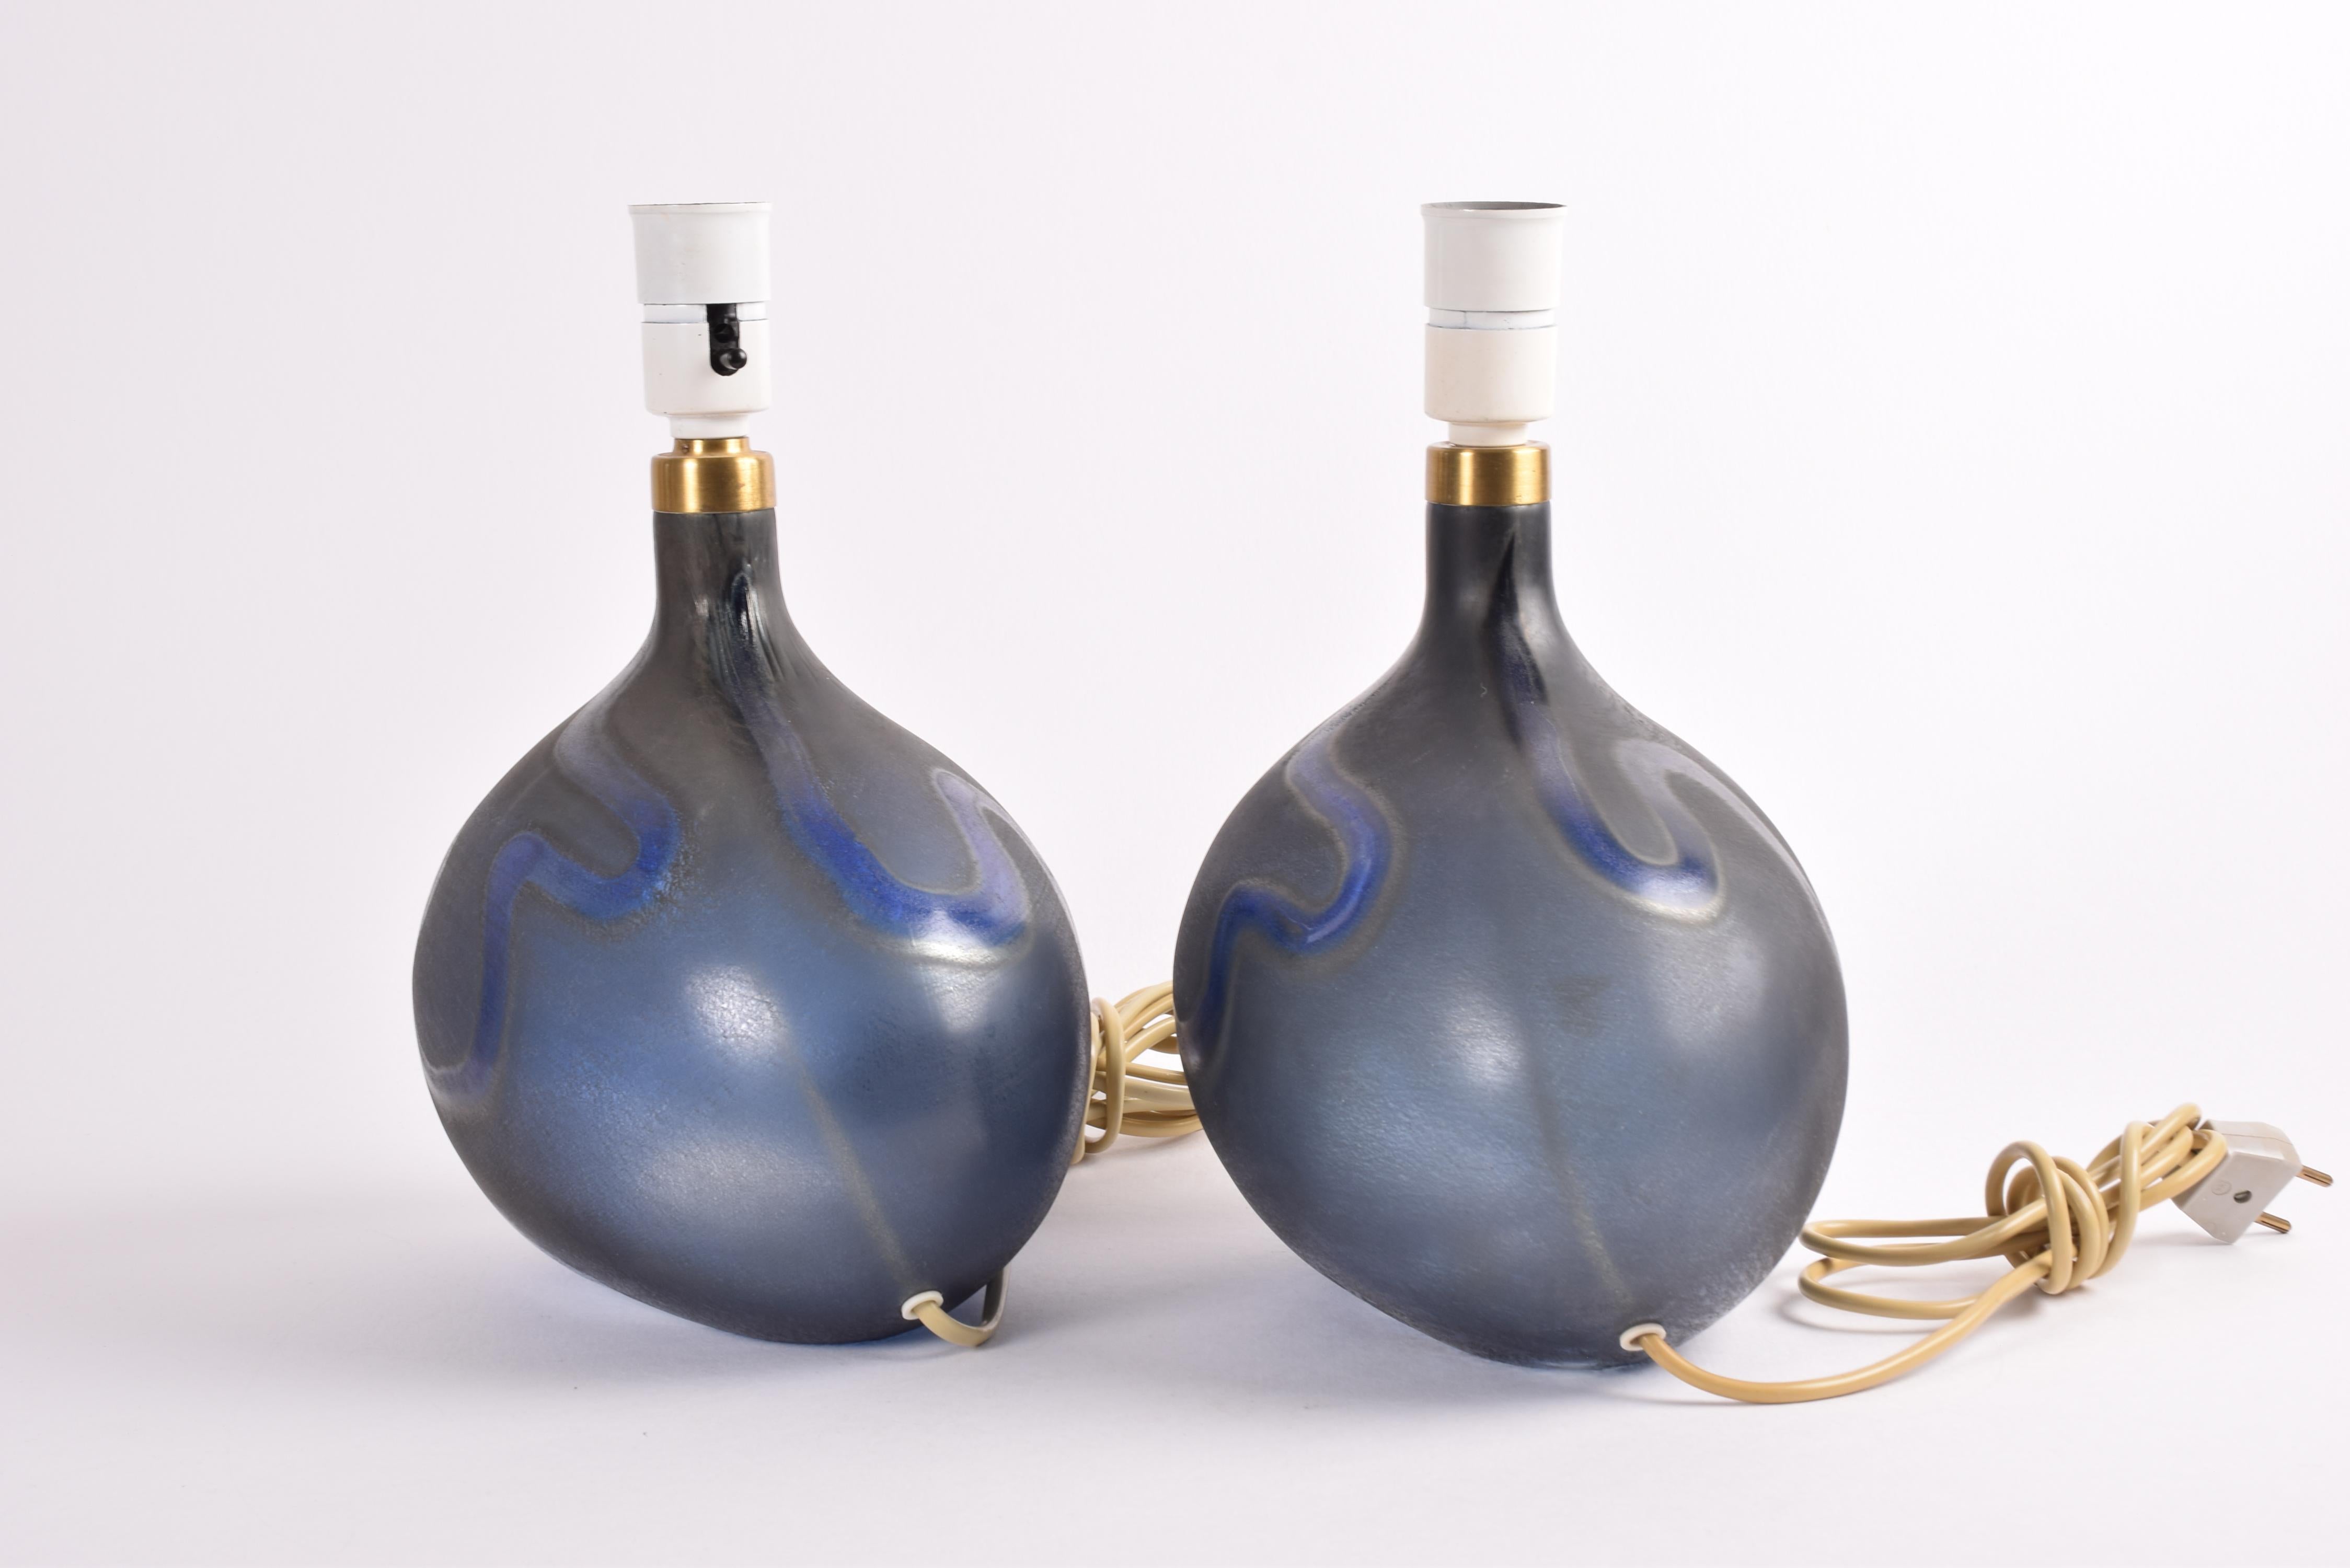 Pair of Holmegaard Blue Sculptural Glass Table Lamps Medium, Danish Modern 1970s For Sale 4